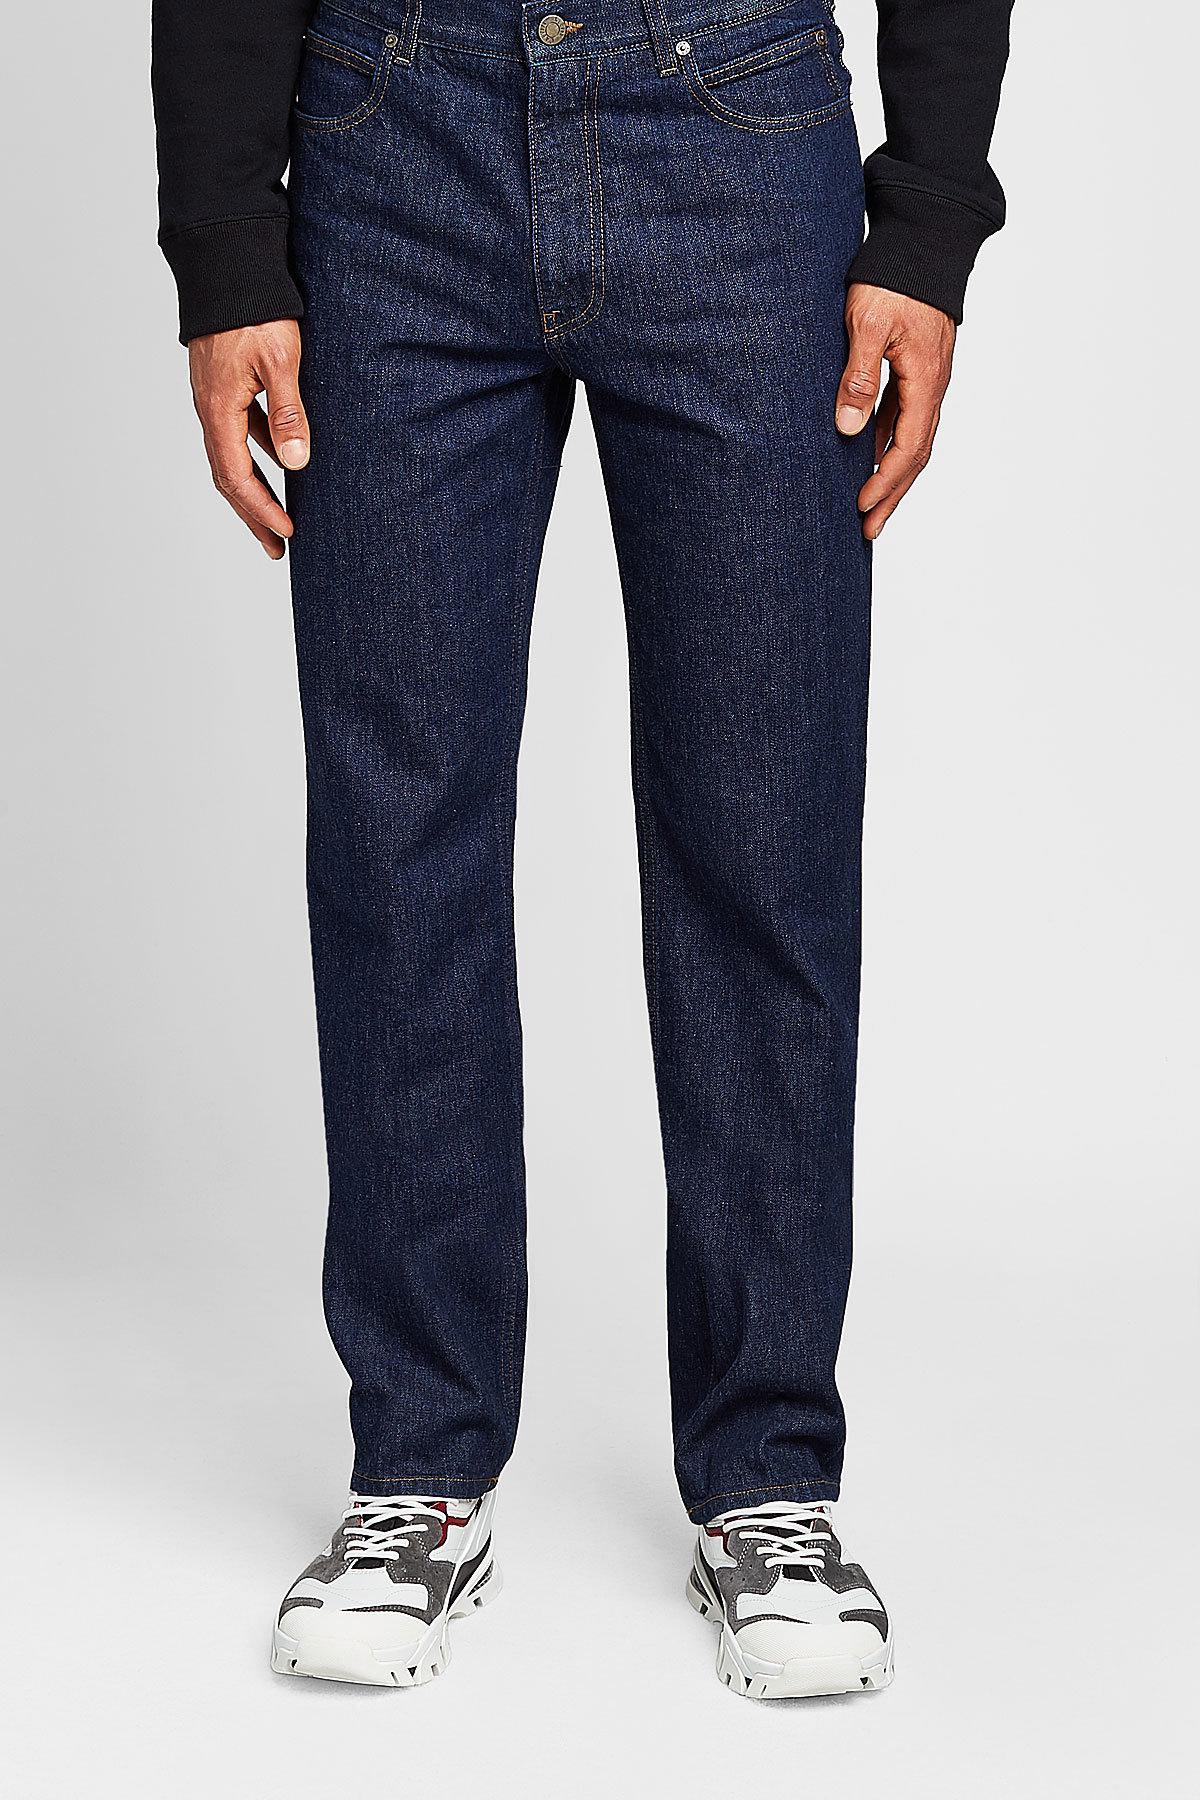 CALVIN KLEIN 205W39NYC Straight Jeans With Contrast Stitching in Blue ...